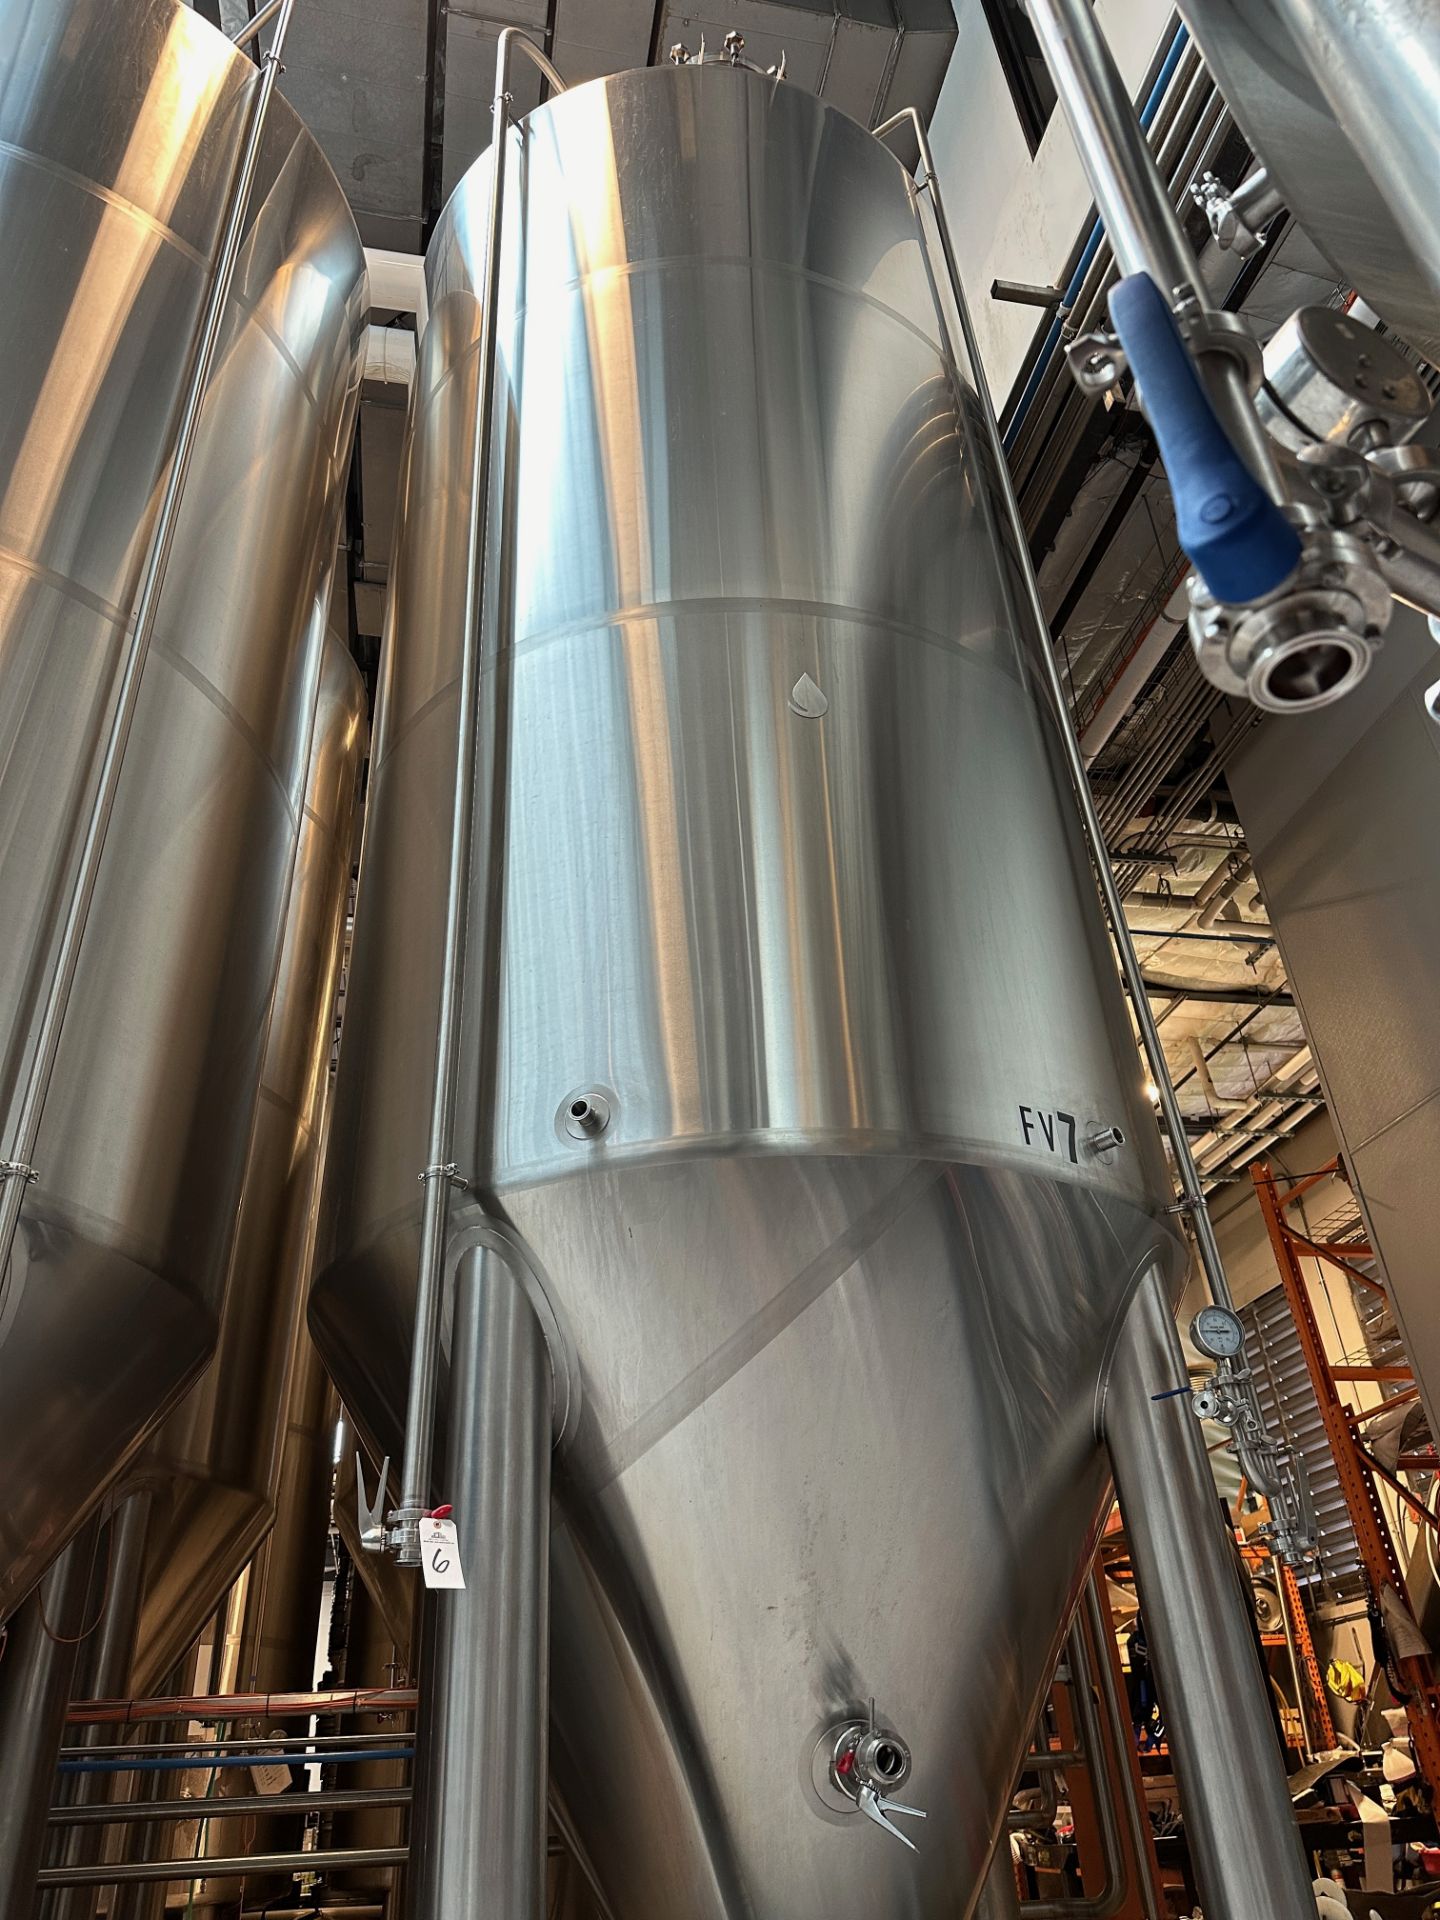 Complete 40 BBL Microbrewery - 40 BBL Deutsche 4-Vessel Brewhouse, Tanks, Can Line - See Description - Image 30 of 335